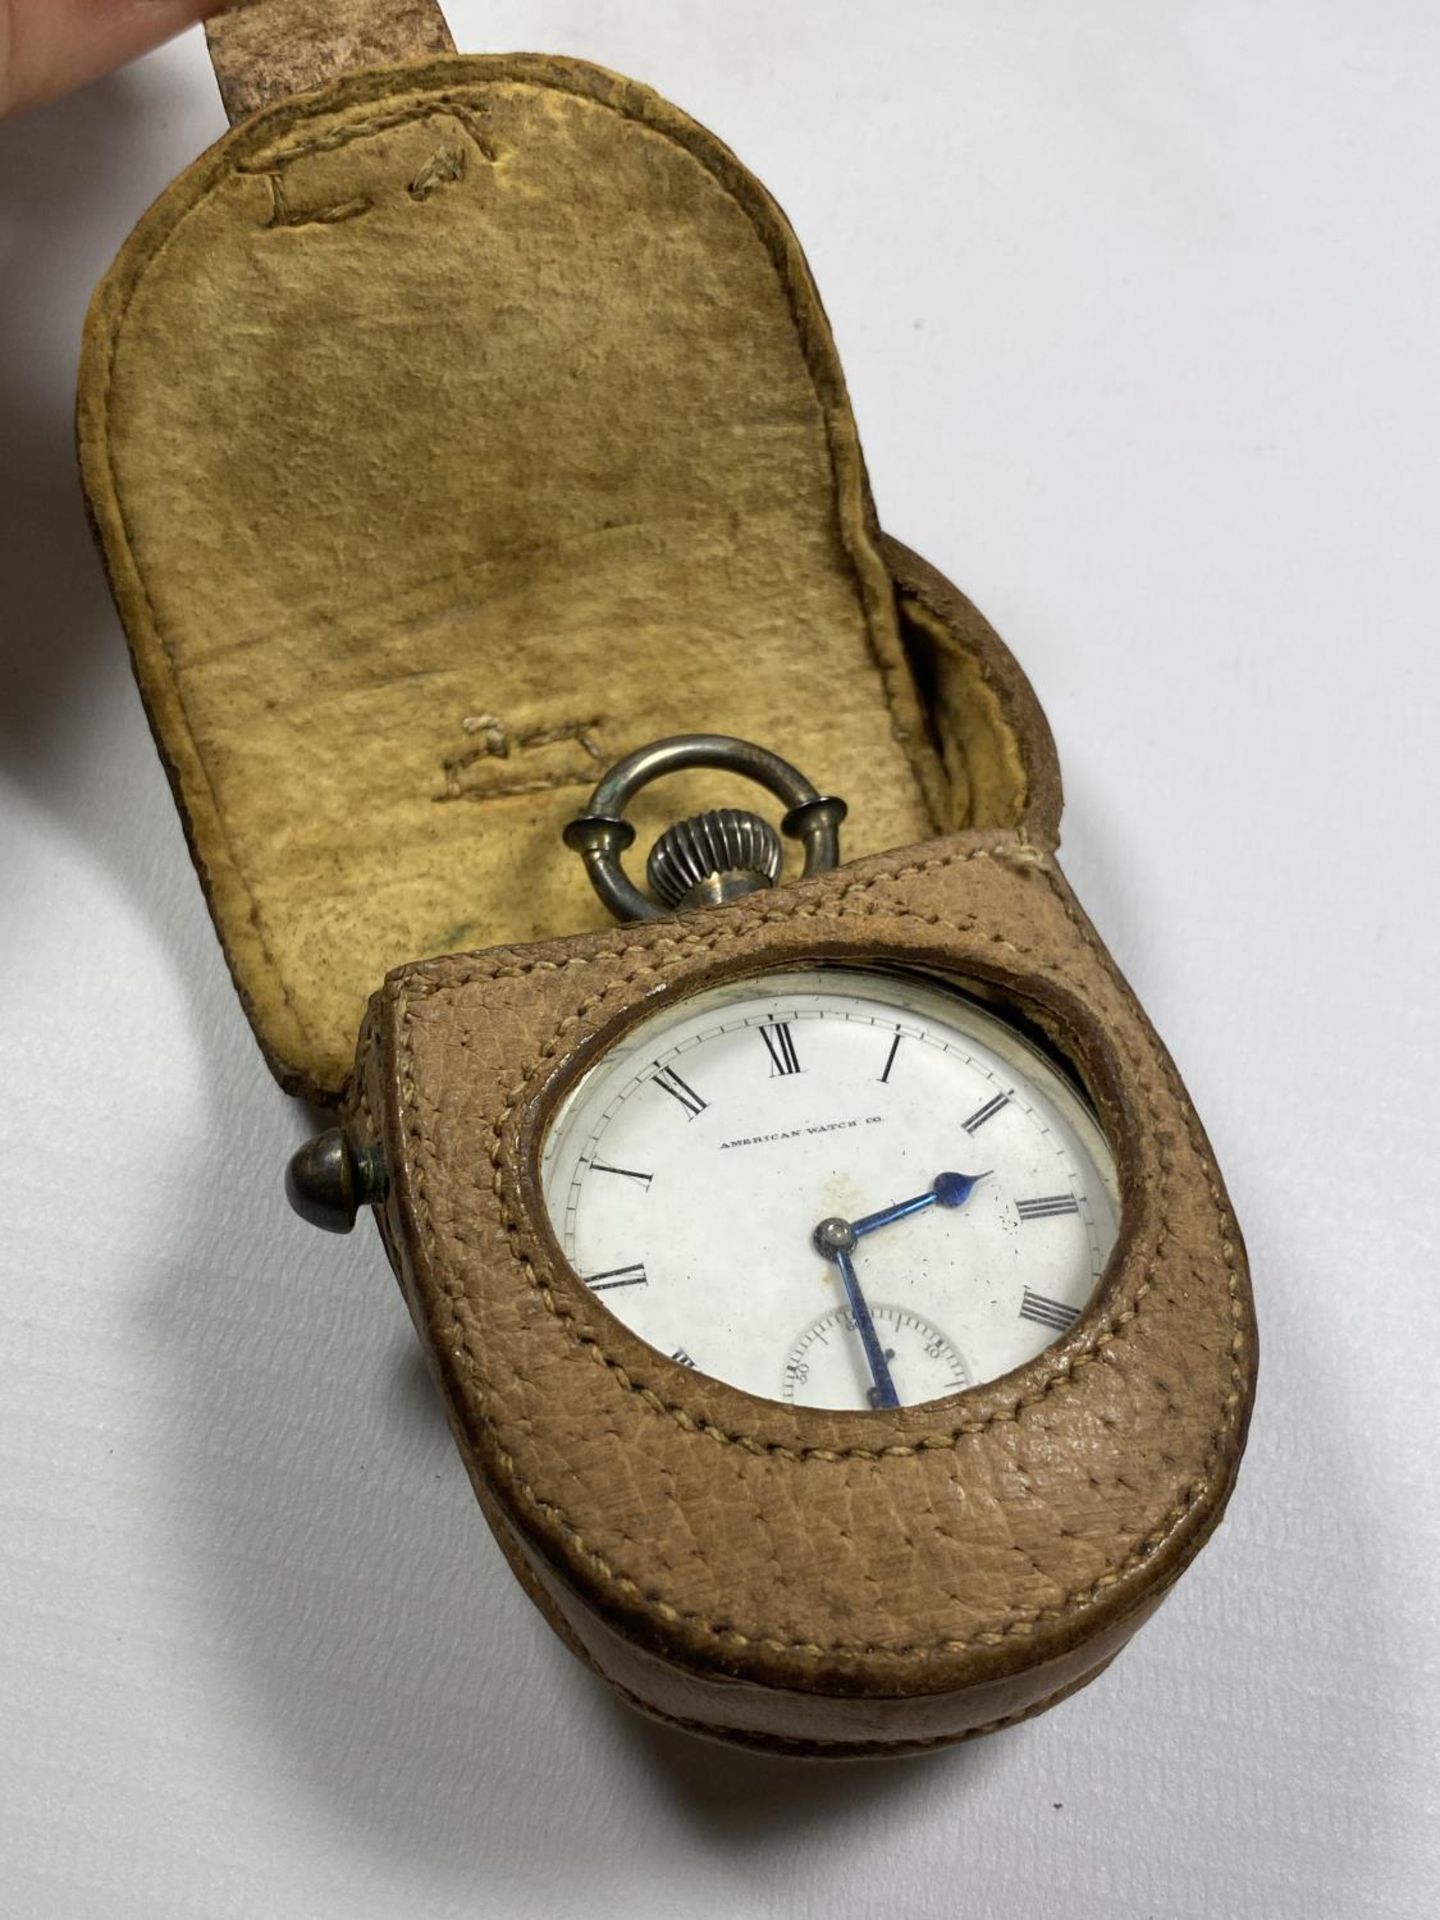 AN AMERICAN WATCH CO. WALTHAM MASS OPEN FACED CROWN WIND POCKET WATCH IN LEATHER POUCH - Image 3 of 3